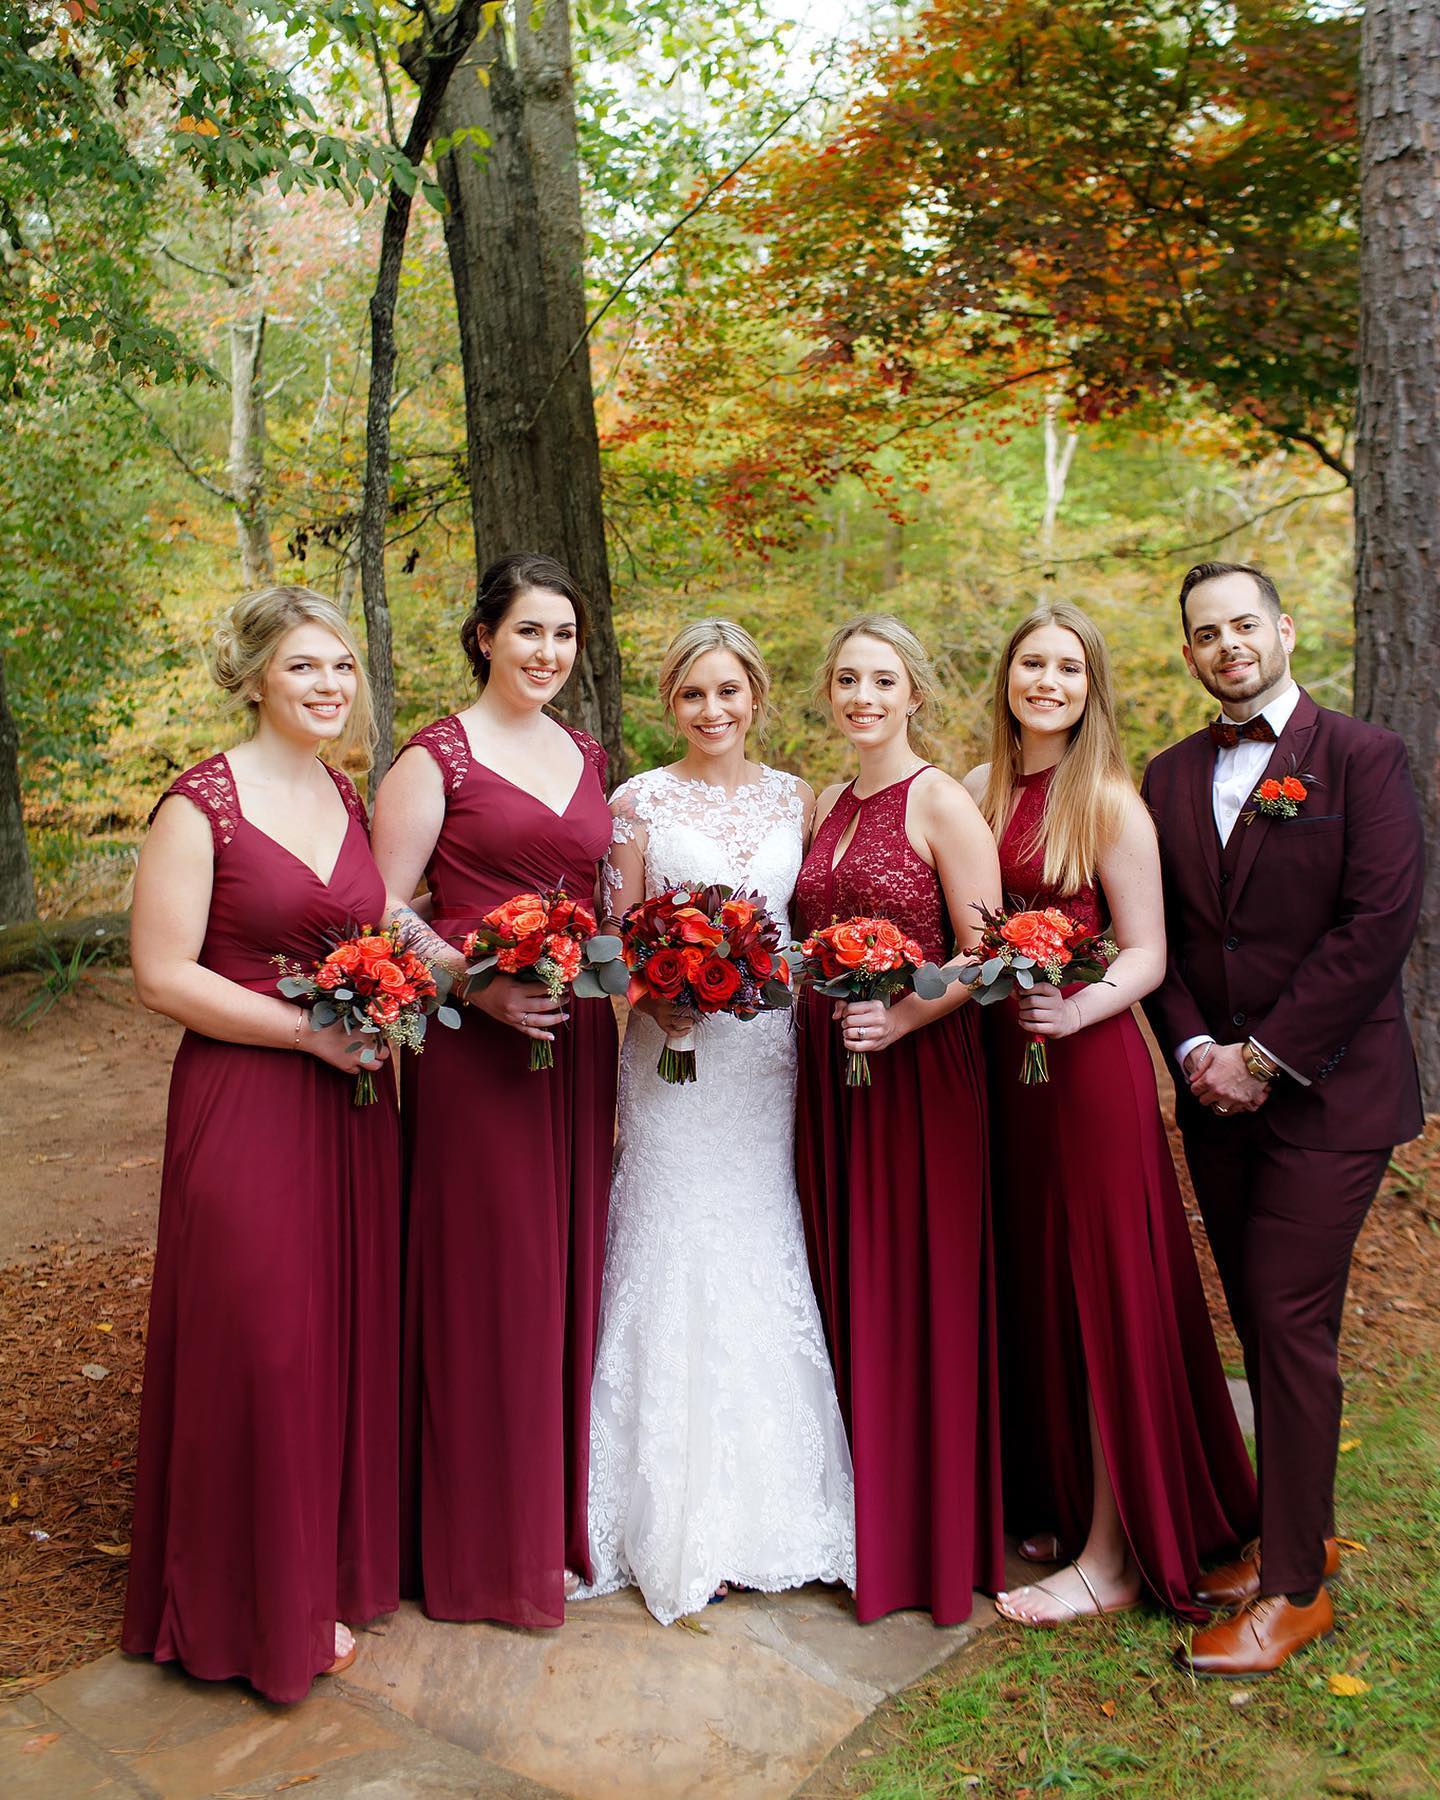 Vecoma Fall Wedding: Burgundy Gowns and Colorful Flowers